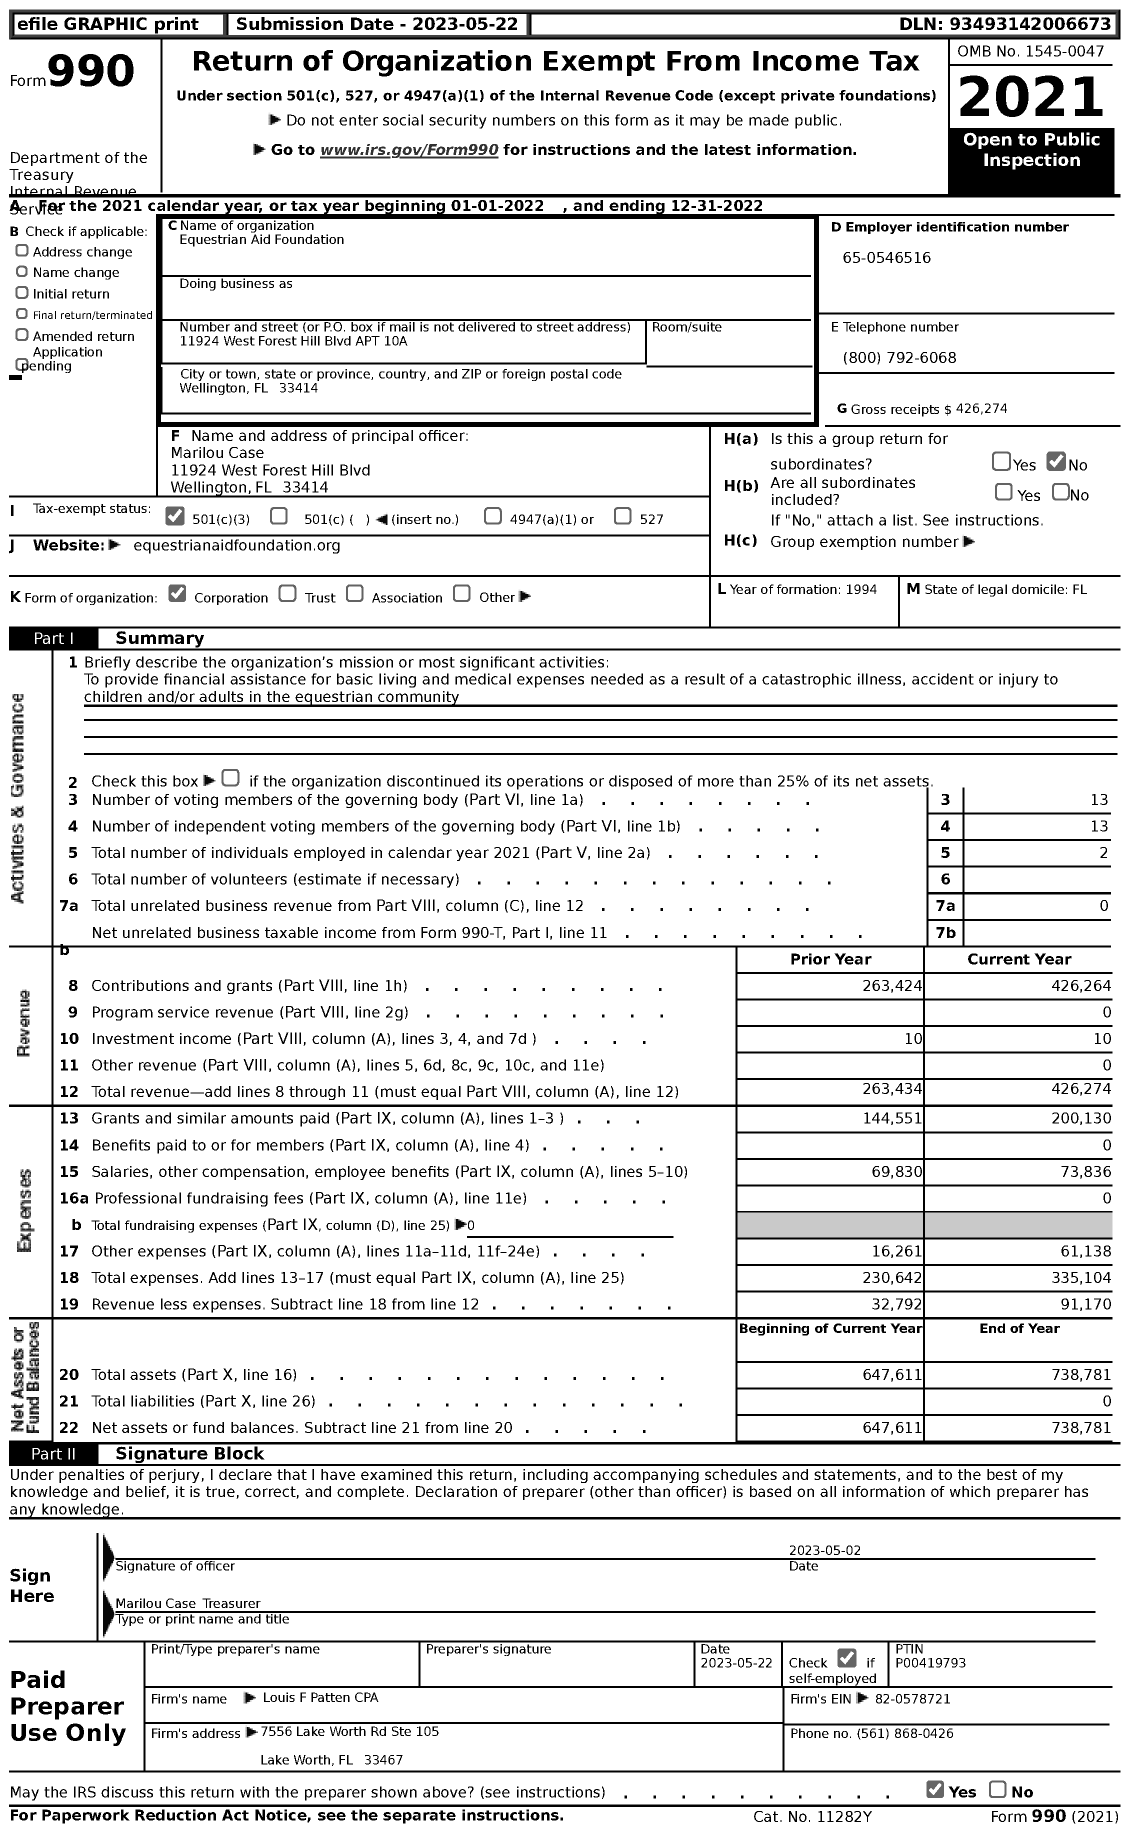 Image of first page of 2022 Form 990 for Equestrian Aid Foundation